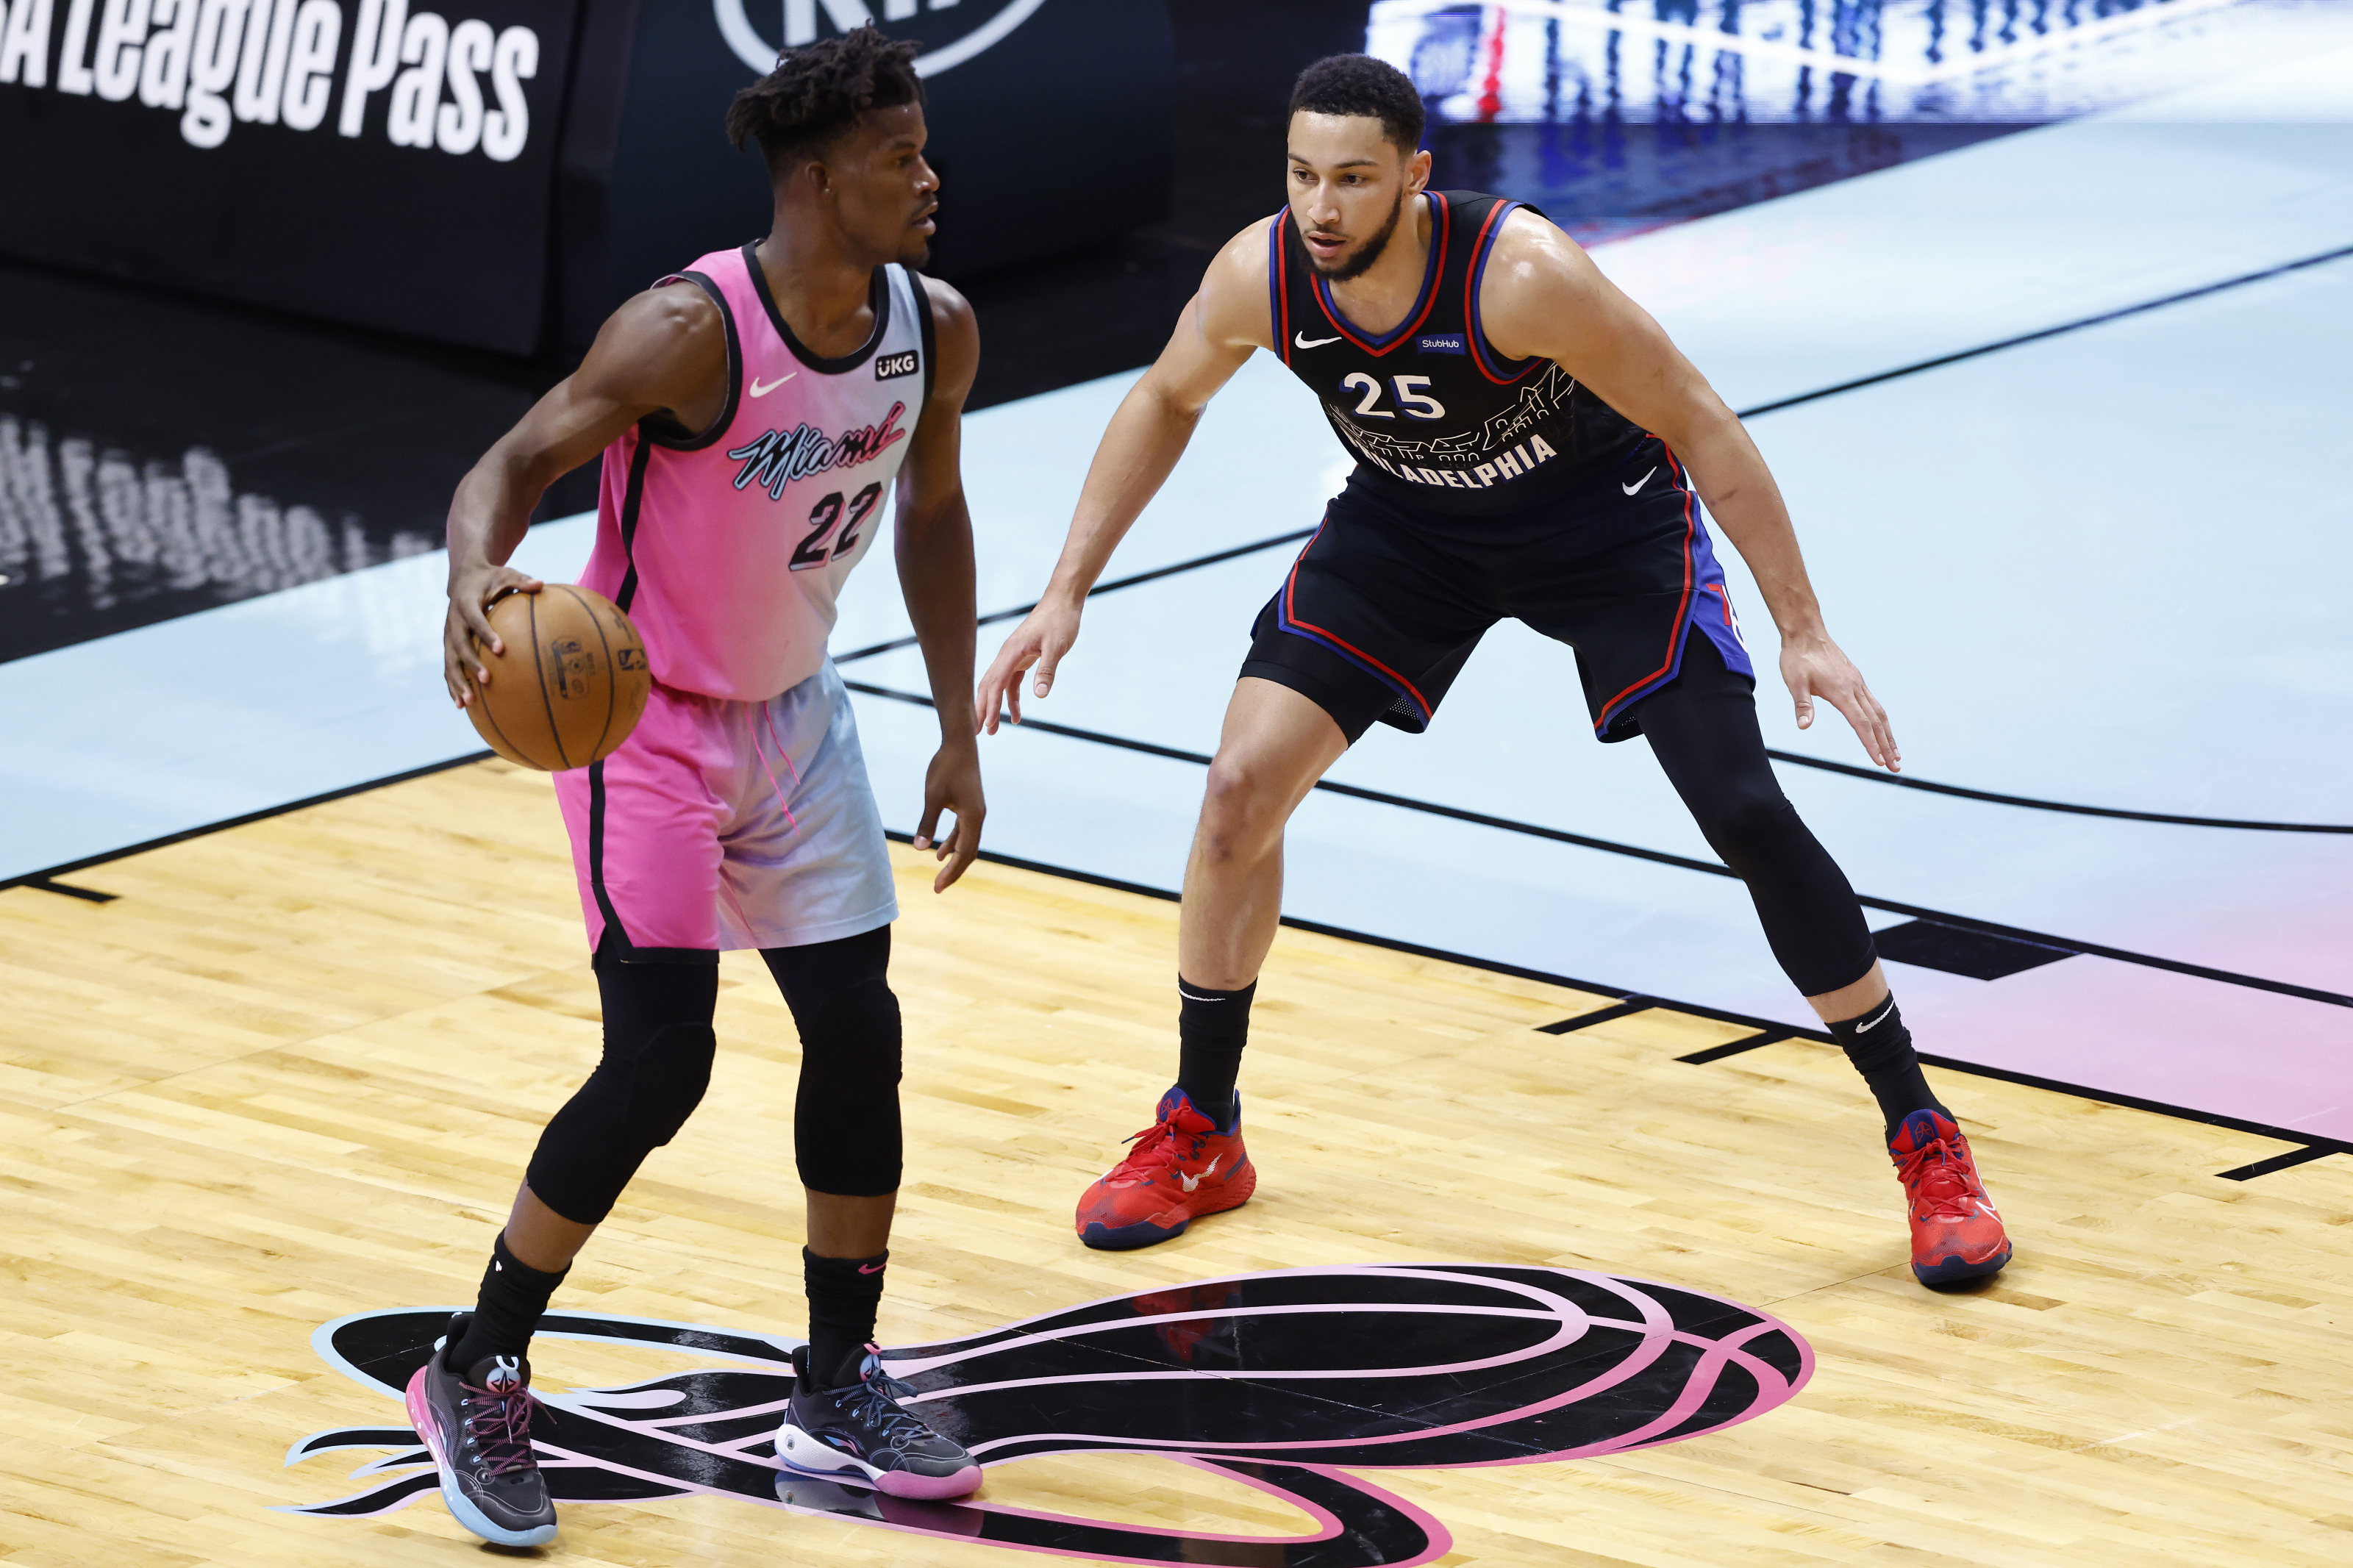 Heat's Spoelstra says Ben Simmons is 'a tough guy' to prepare for